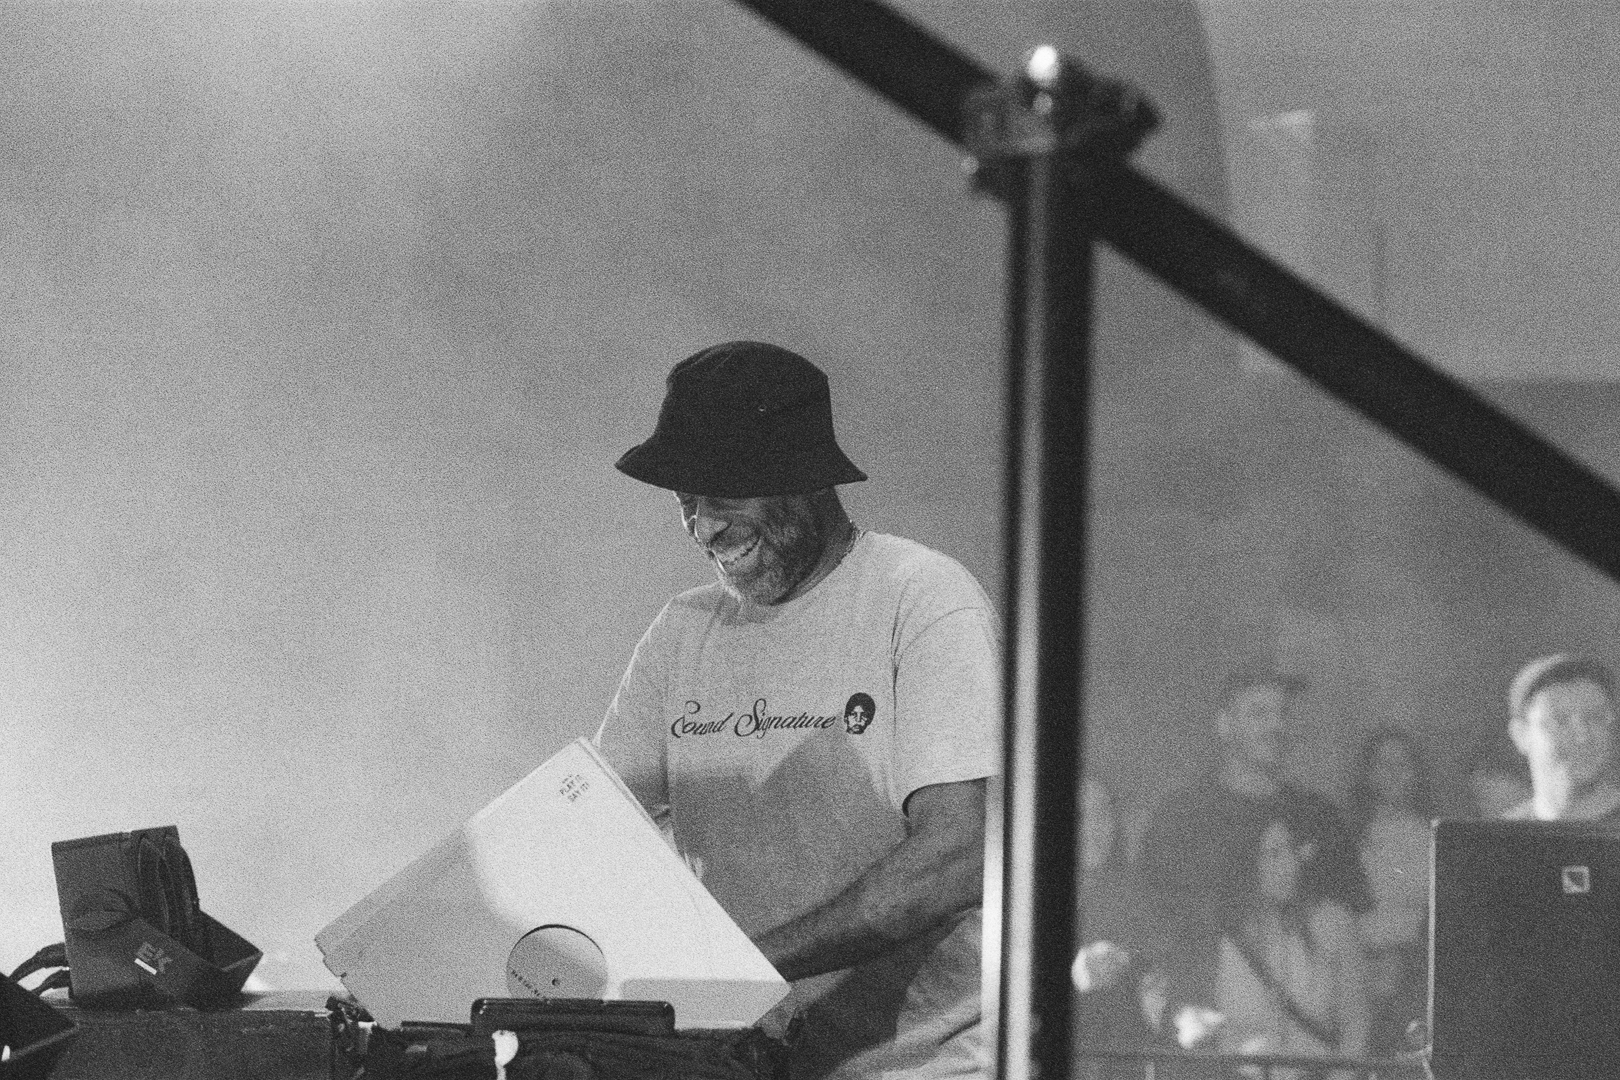 Black and white photo of Theo Parrish performing while smiling behind the booth. Beside him are a couple of records and in the background some audience members are present.